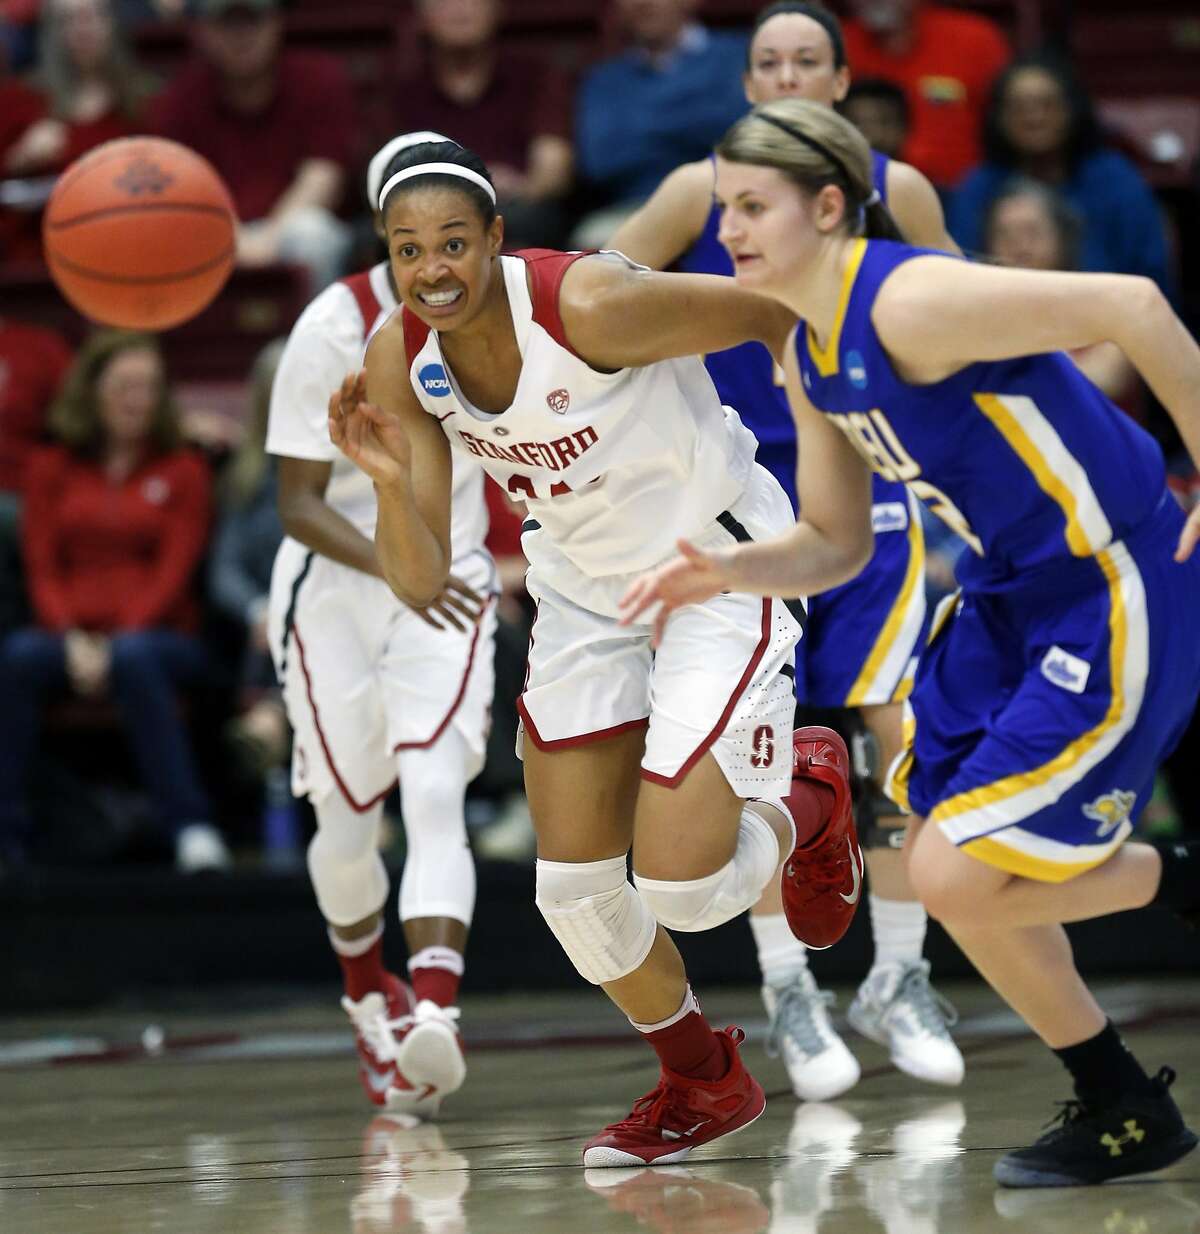 Stanford's Erica McCall and South Dakota State's Macy Miller chase loose ball in 2nd quarter during 2016 NCAA Division 1 Women's Basketball Tournament game in Stanford, Calif., on Monday, March 21, 2016.